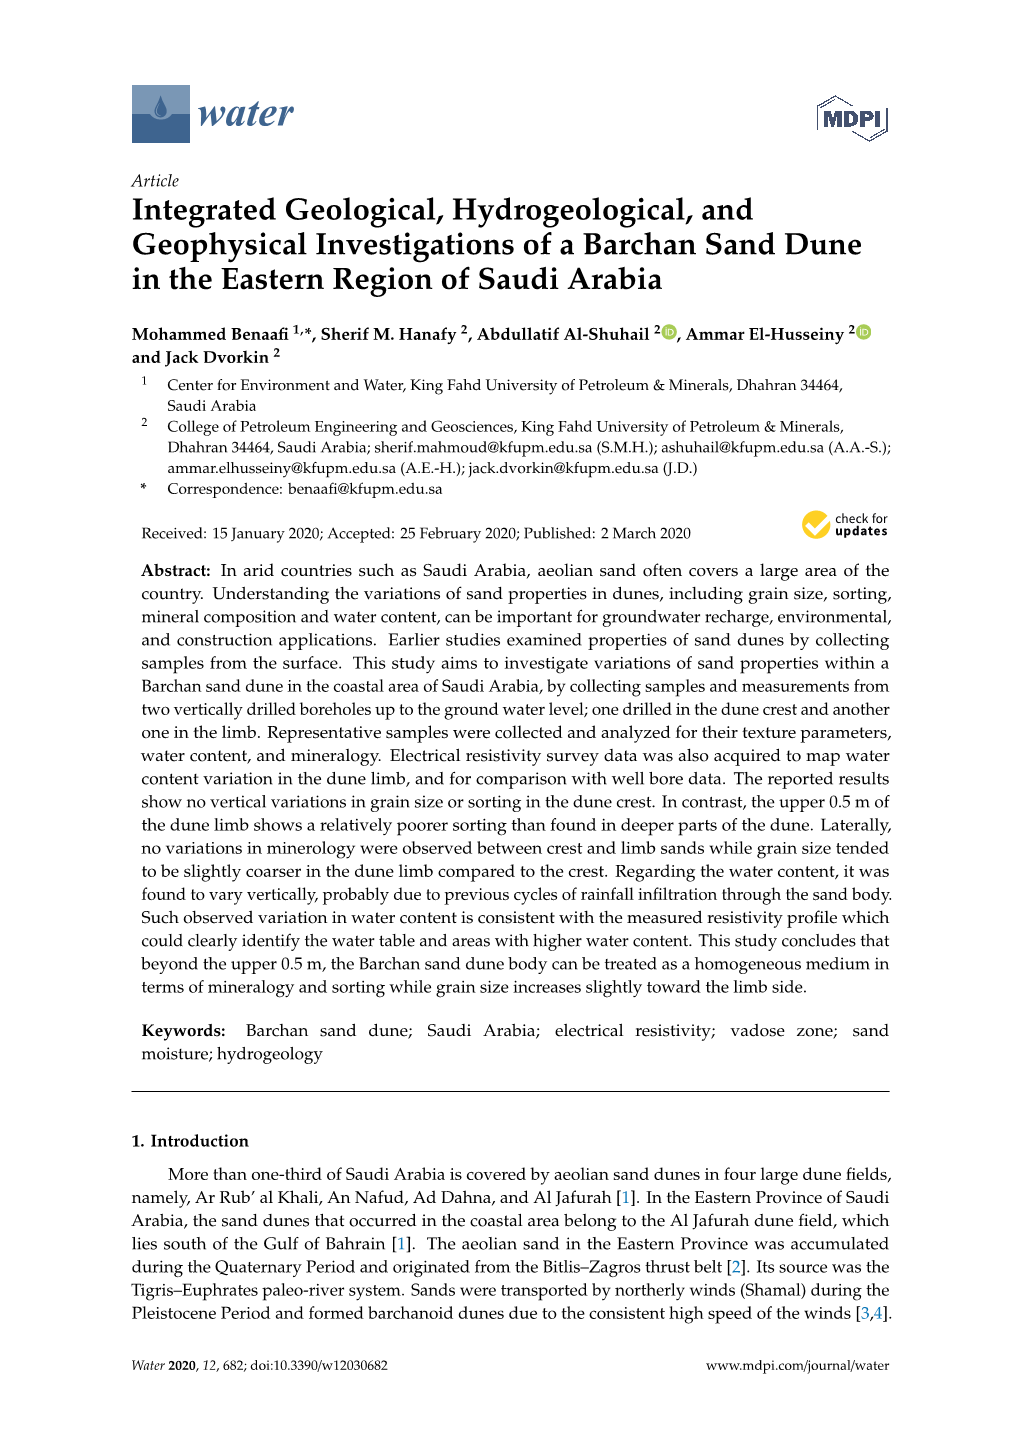 Integrated Geological, Hydrogeological, and Geophysical Investigations of a Barchan Sand Dune in the Eastern Region of Saudi Arabia